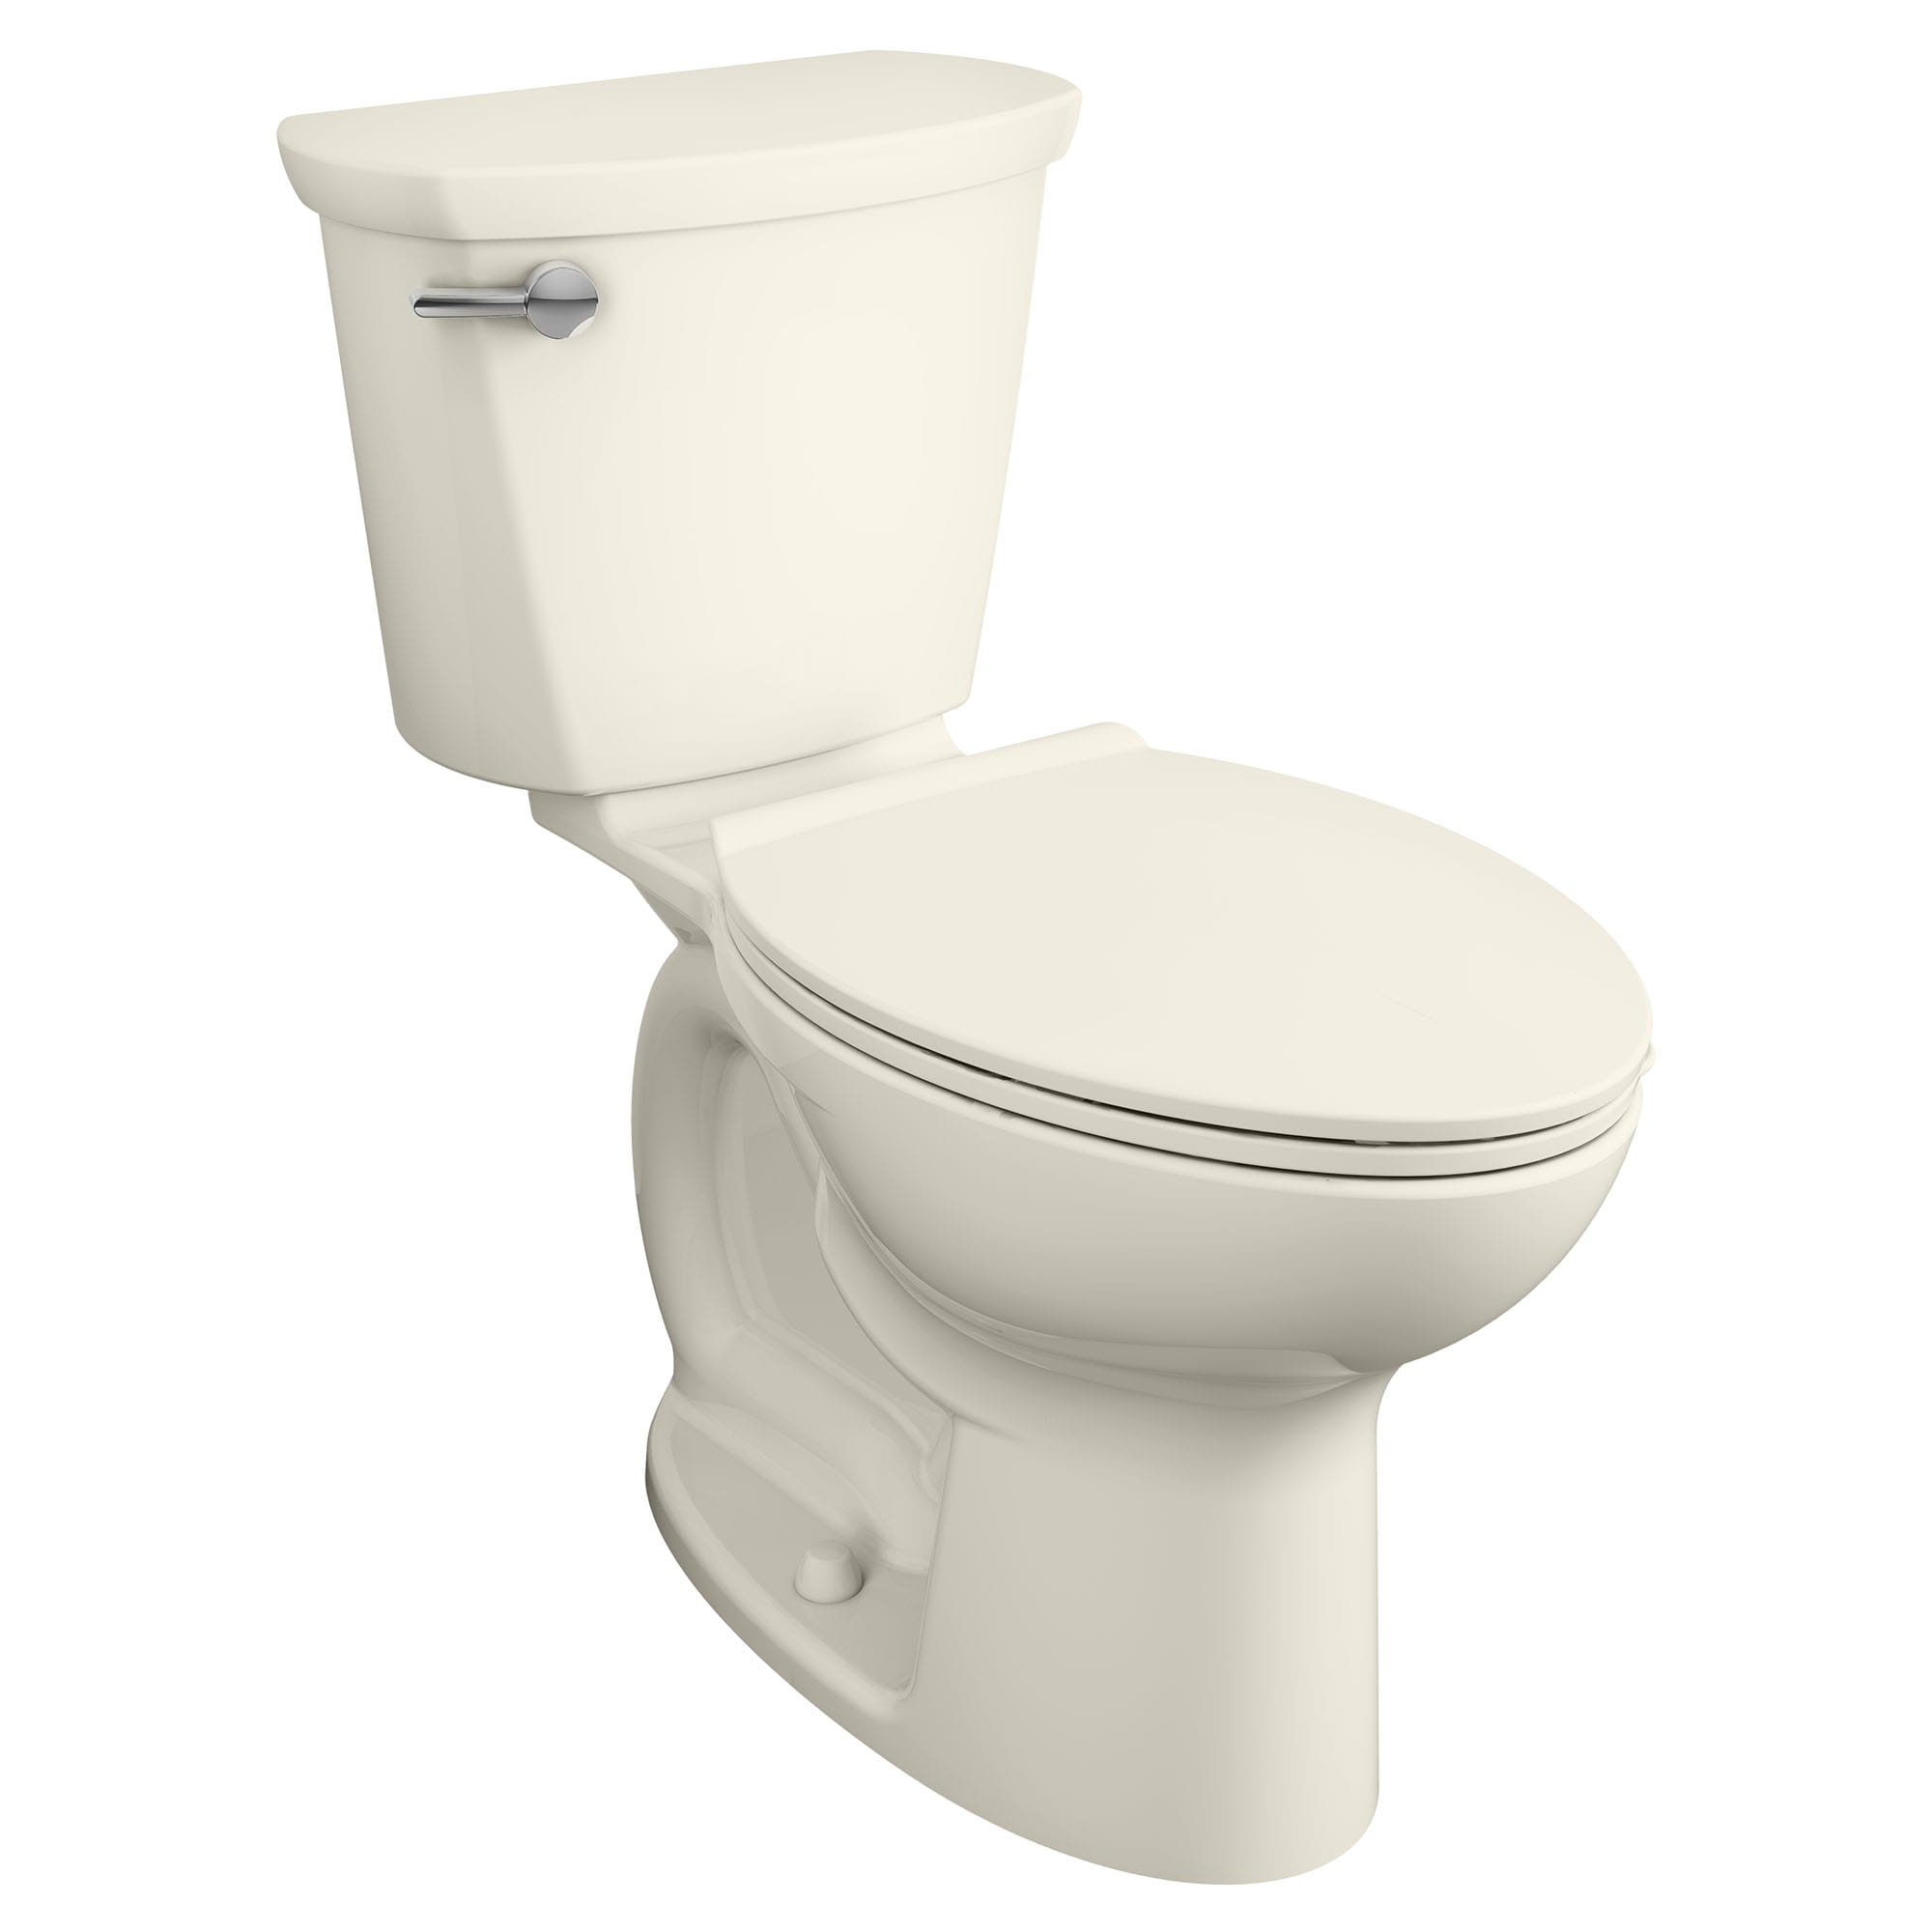 Cadet PRO Two Piece 128 gpf 48 Lpf Compact Chair Height Elongated 14 Inch Rough Toilet Less Seat LINEN